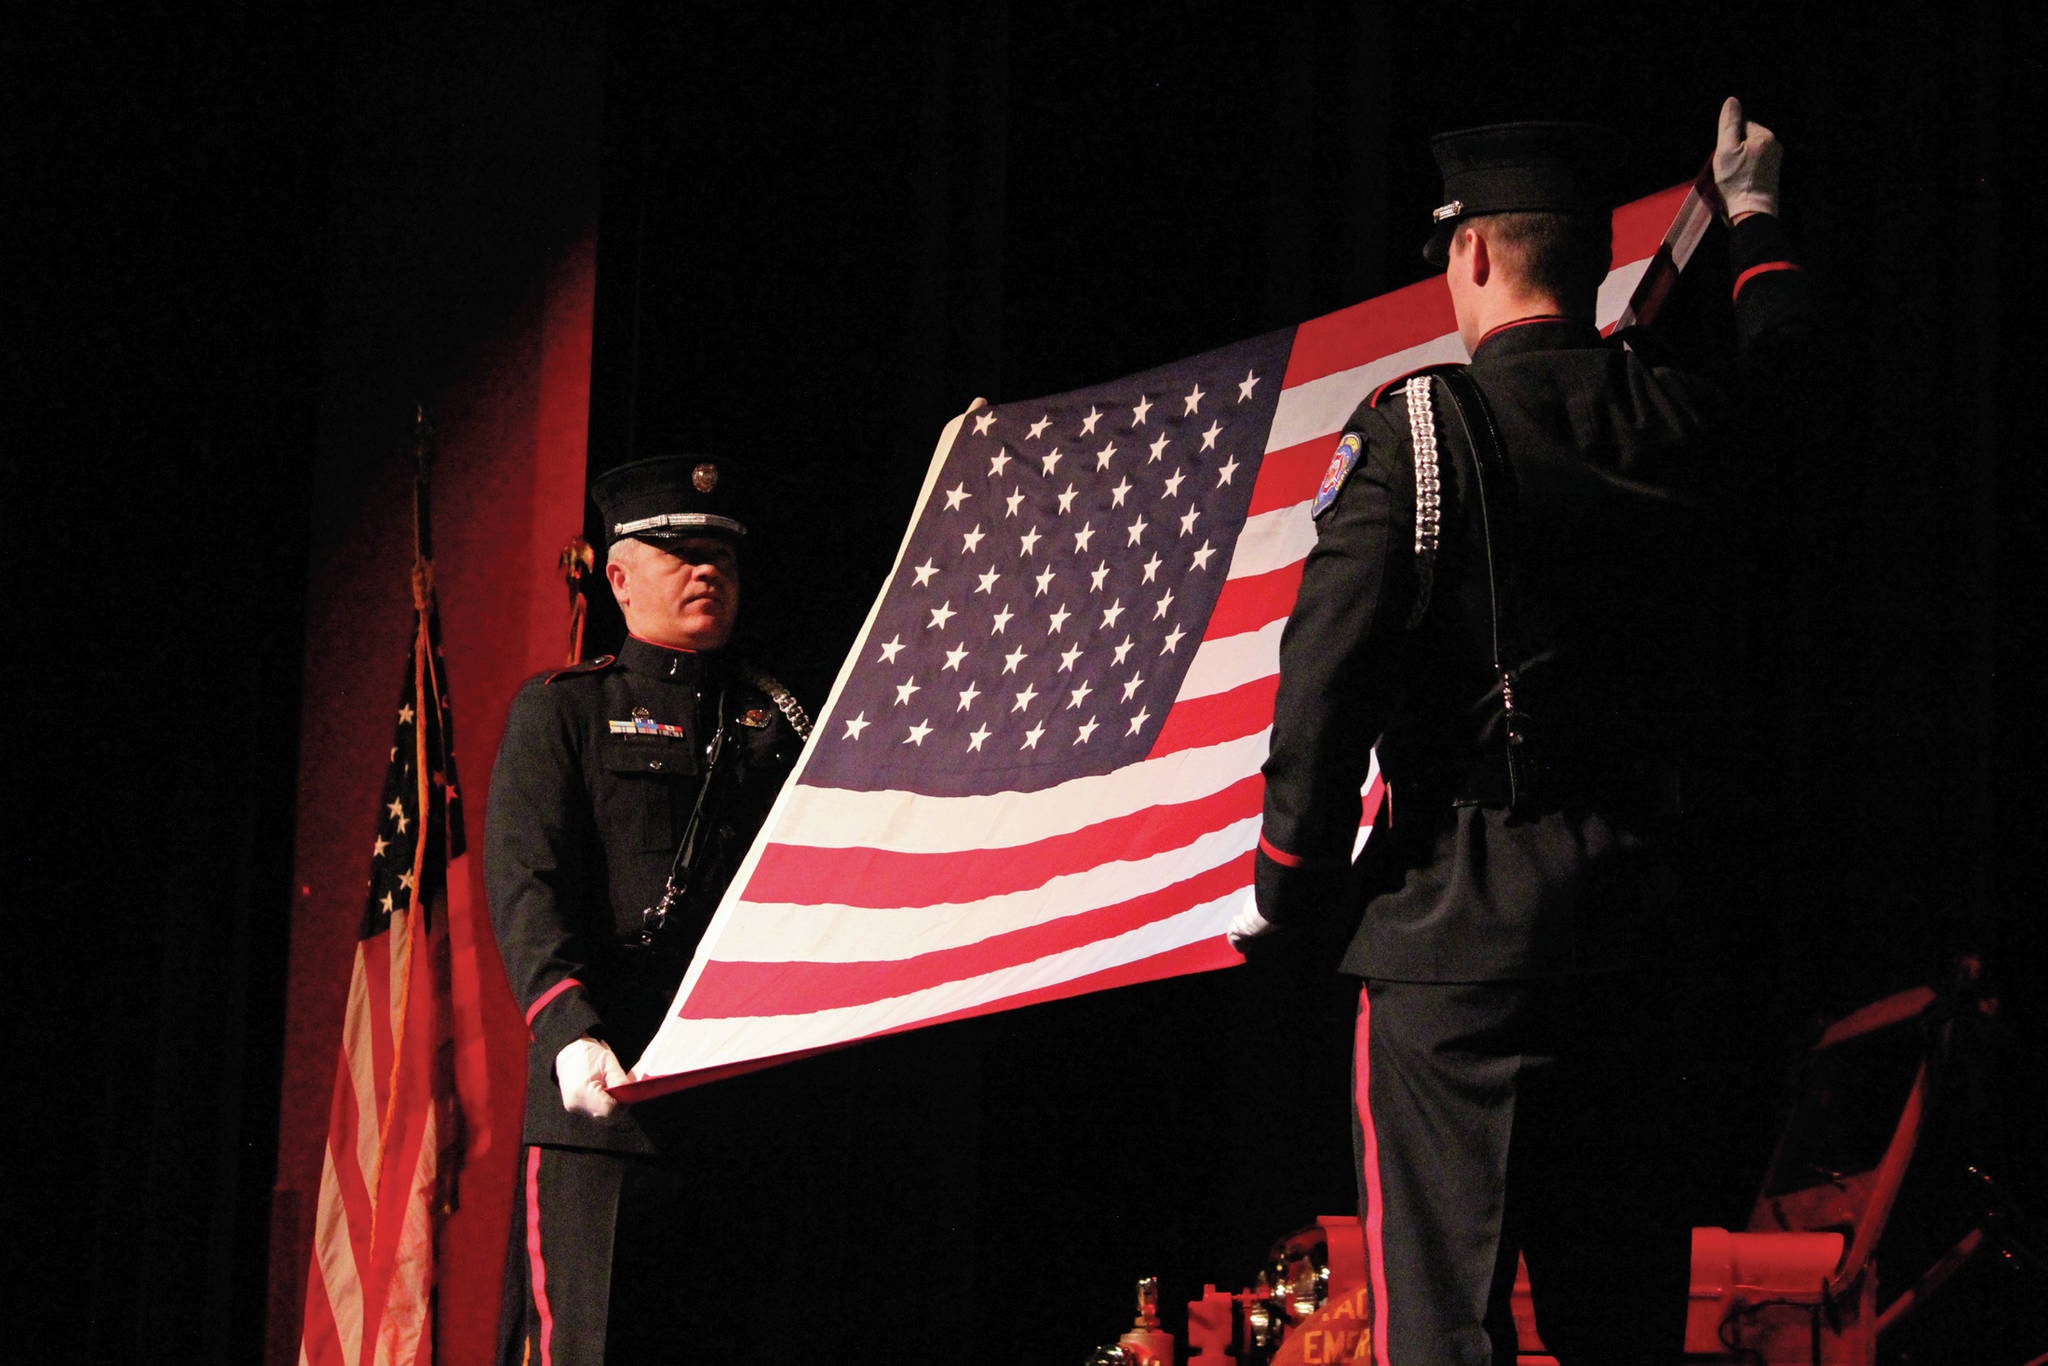 An American flag is presented in a ceremony before being given to the family of Gary Thomas during a memorial held for him Sunday, Jan. 19, 2020 at the Homer Mariner Theatre at Homer High School in Homer, Alaska. Thomas, who died this month in a water heater explosion, was a volunteer firefighter for more than 40 years. (Photo by Megan Pacer/Homer News)